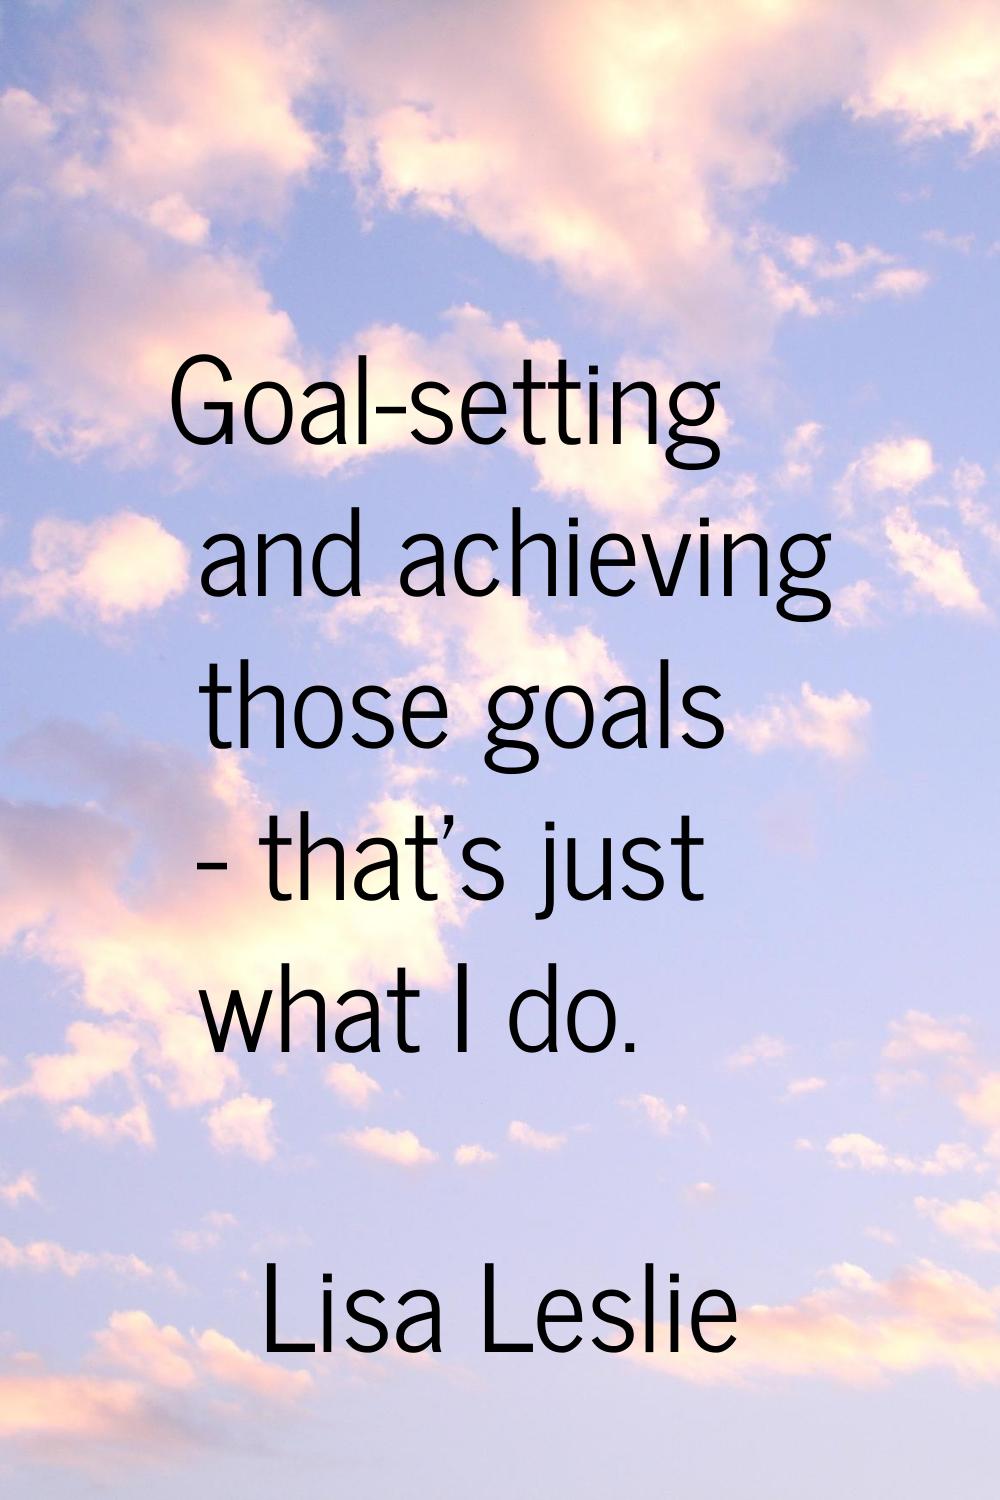 Goal-setting and achieving those goals - that's just what I do.